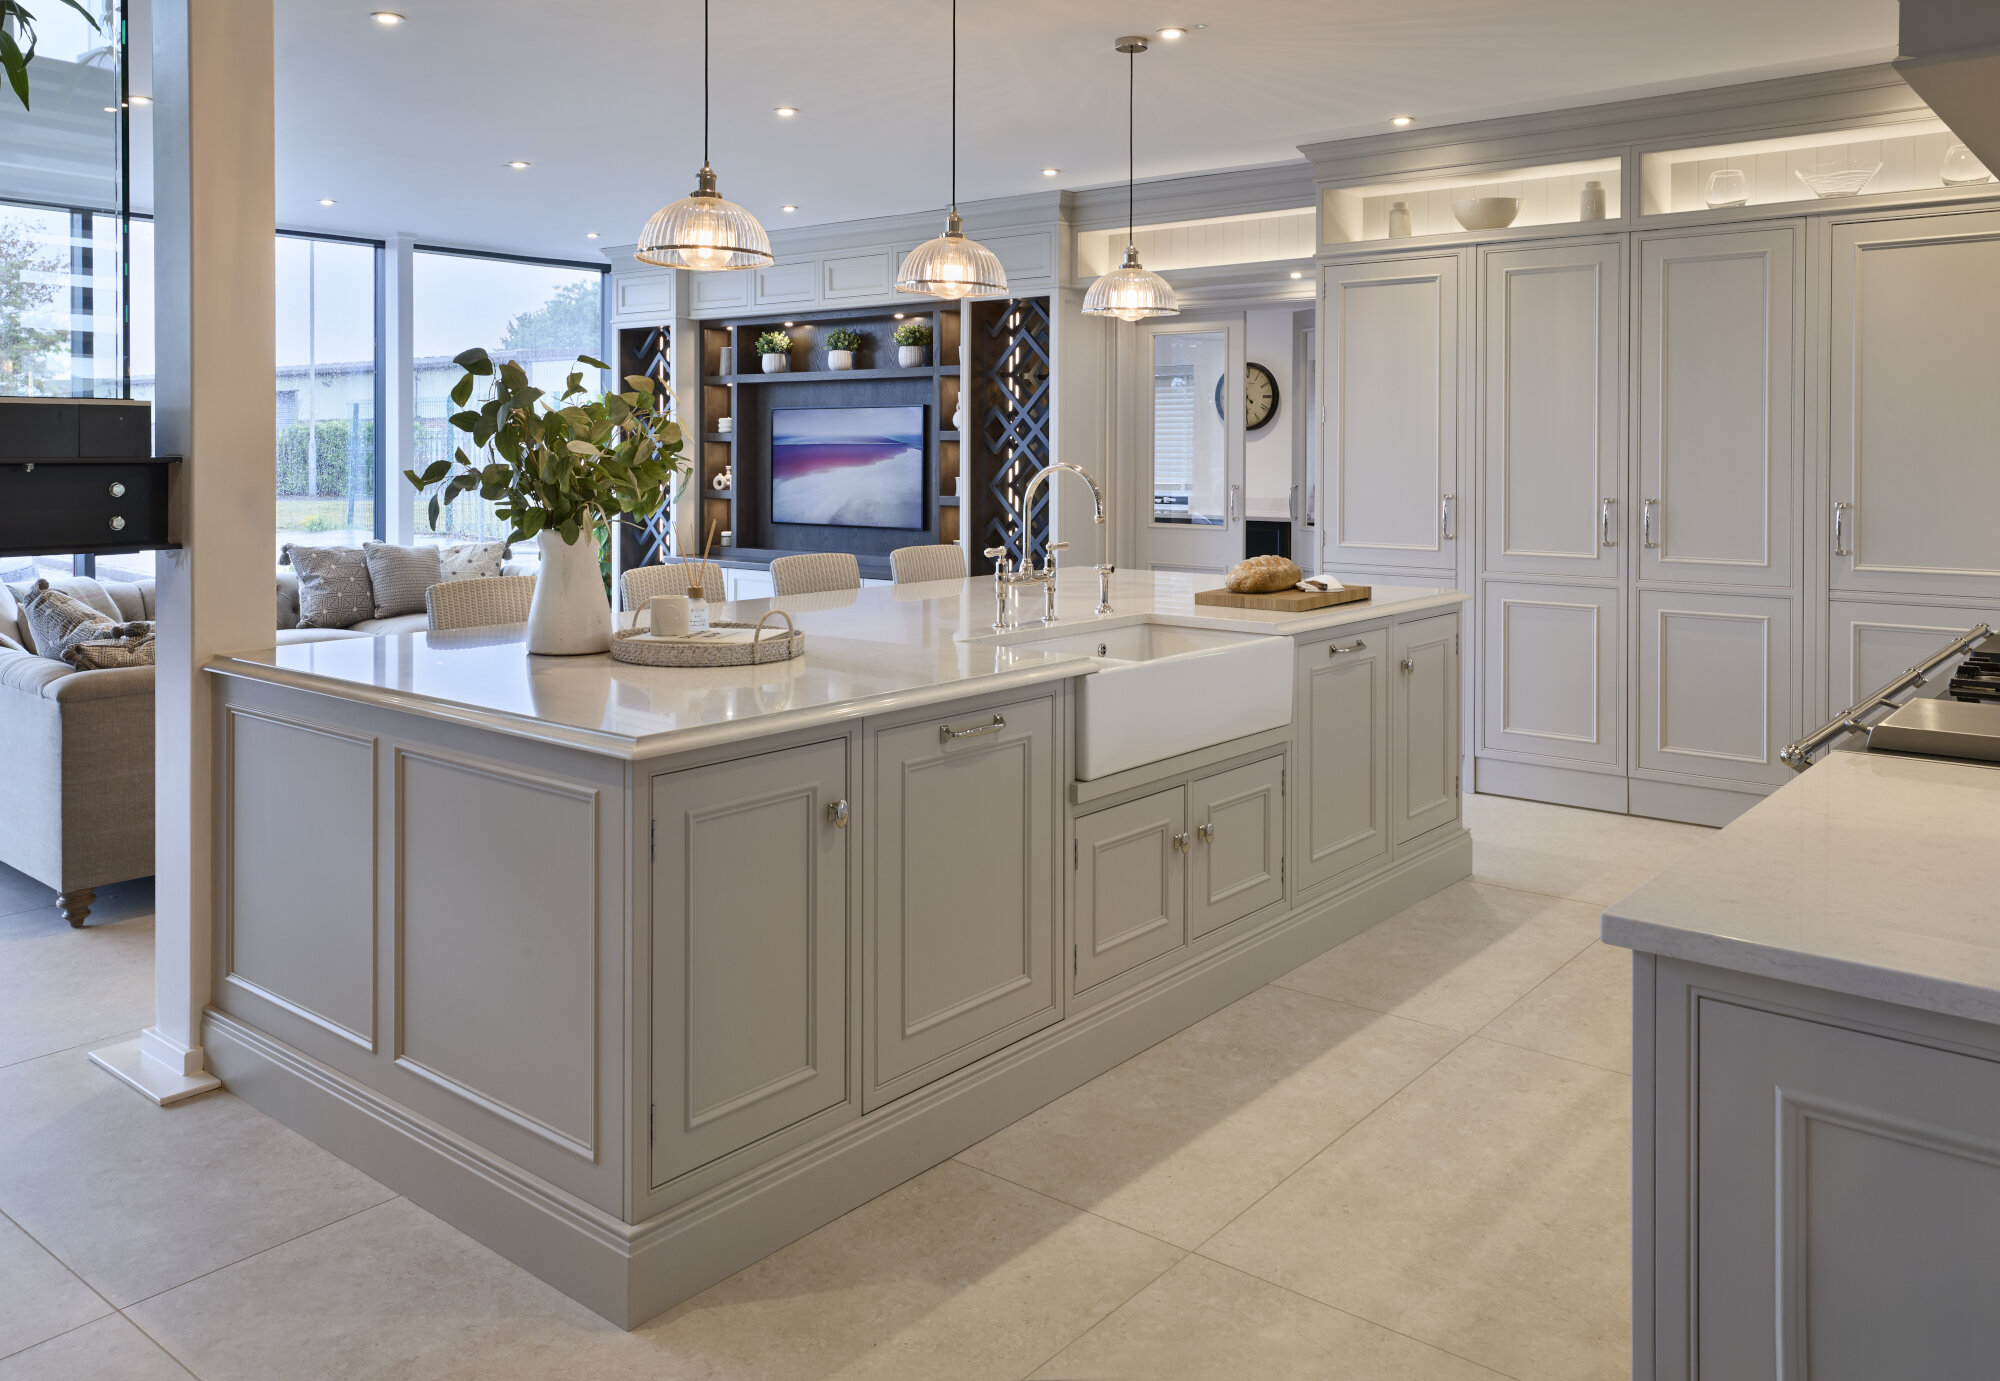 This Bespoke Kitchen Design is on display in our showroom near Alfreton